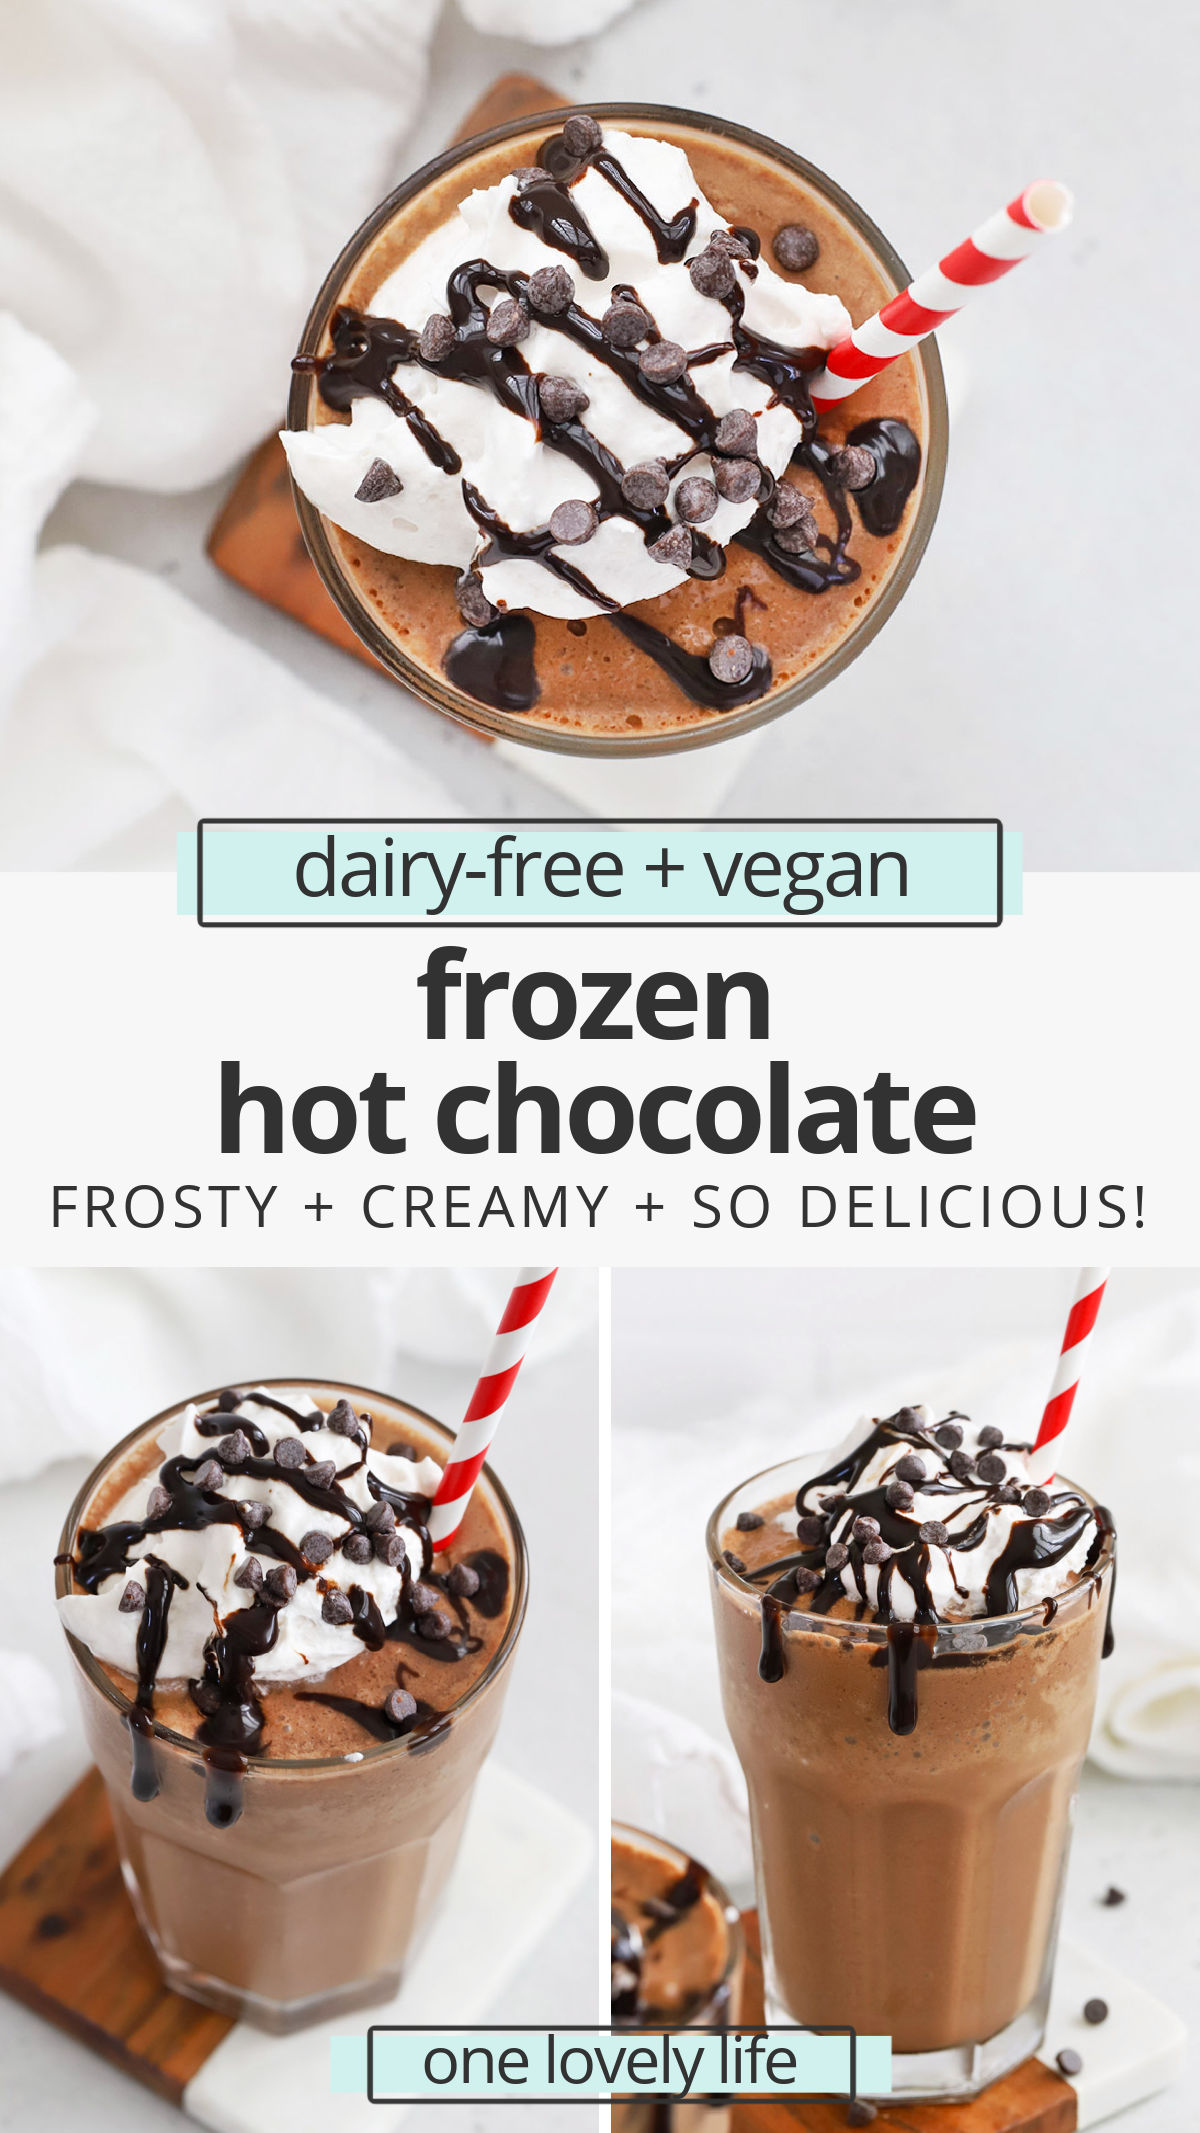 Vegan Frozen Hot Chocolate - This dairy-free frozen hot chocolate is frost, creamy, and so delicious with a swirl of whipped cream and some chocolate on top. You won't want to miss it! // Paleo Frozen Hot Chocolate // Healthy Frozen Hot Chocolate recipe // easy frozen hot chocolate // vegan serendipity frozen hot chocolate // homemade frozen hot chocolate